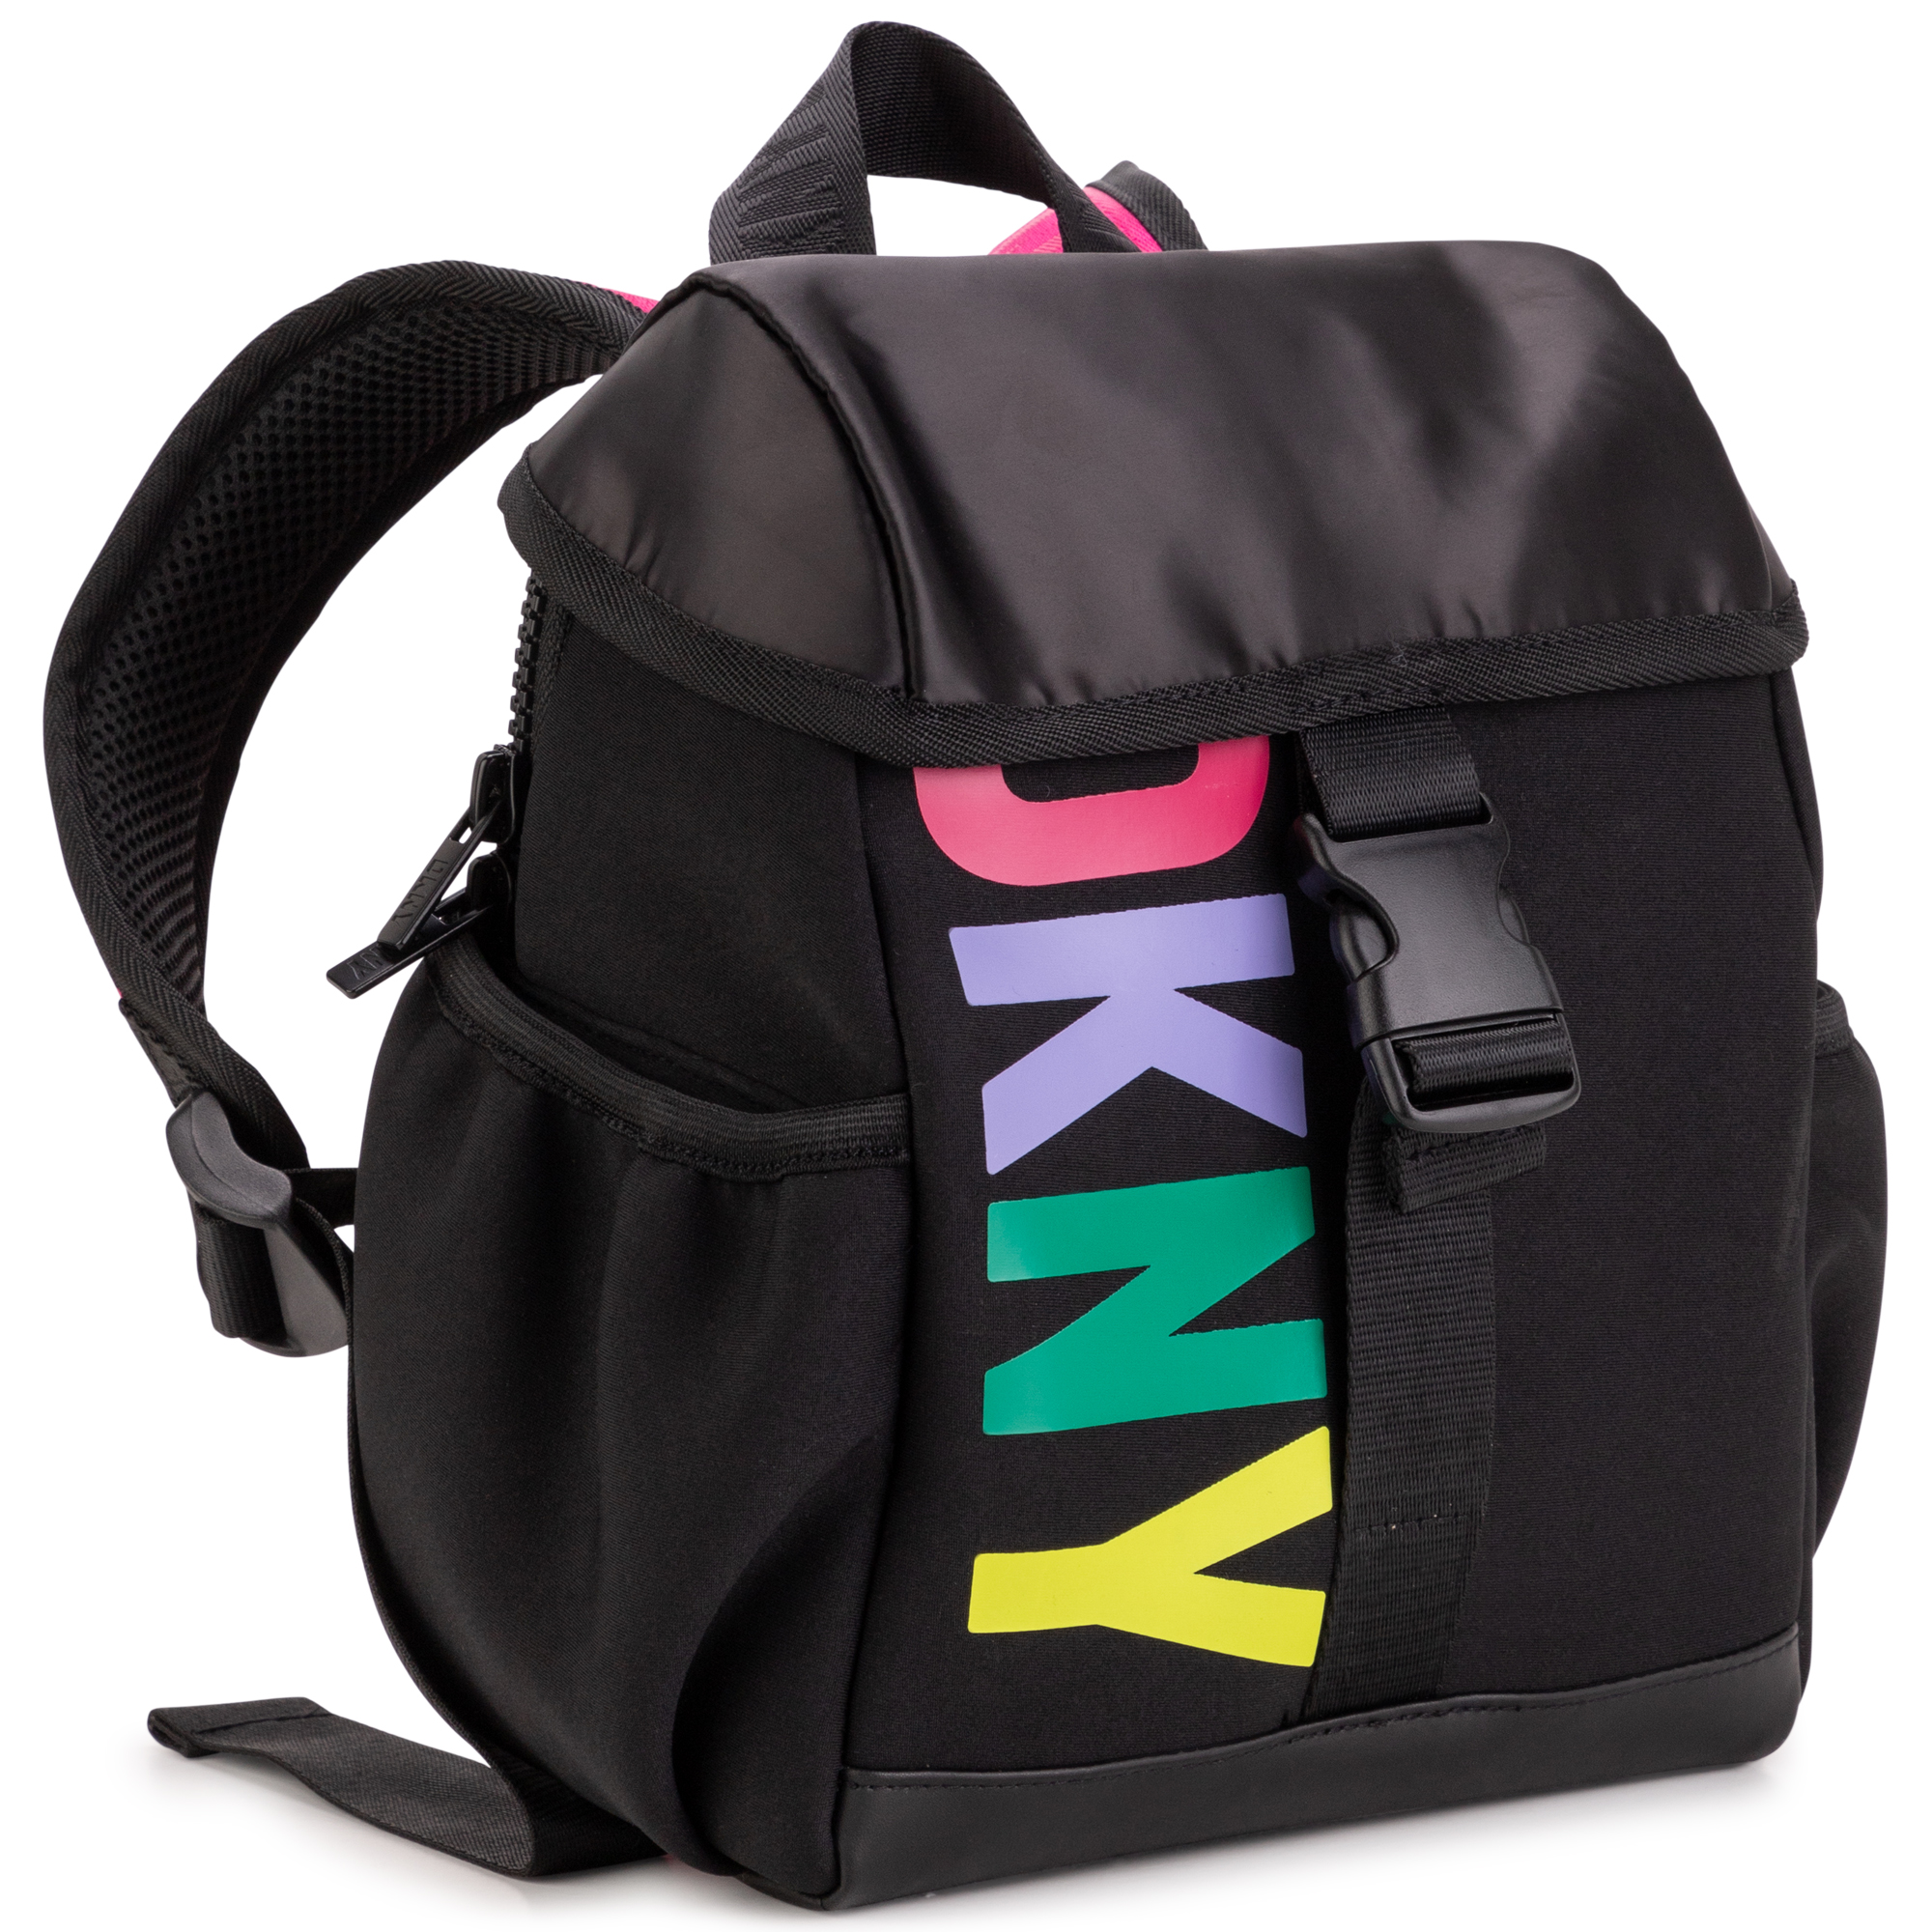 Flap closure backpack DKNY for GIRL